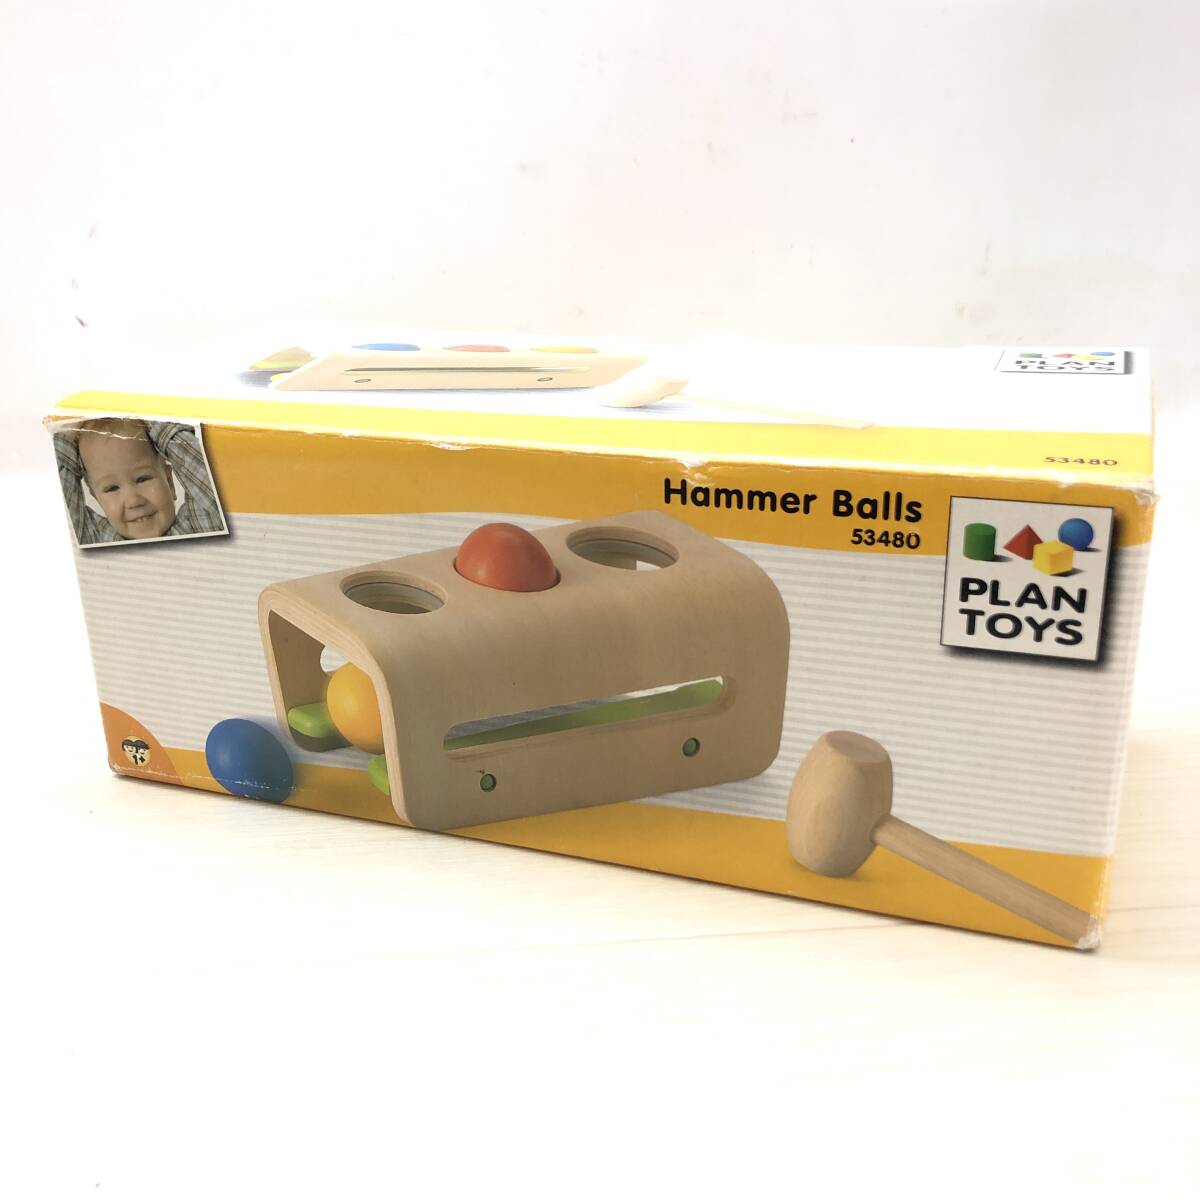 !PLANTOYS plan toy 53480 HammerBalls Hammer ball wooden toy intellectual training toy playing Kids baby box attaching secondhand goods!G23071